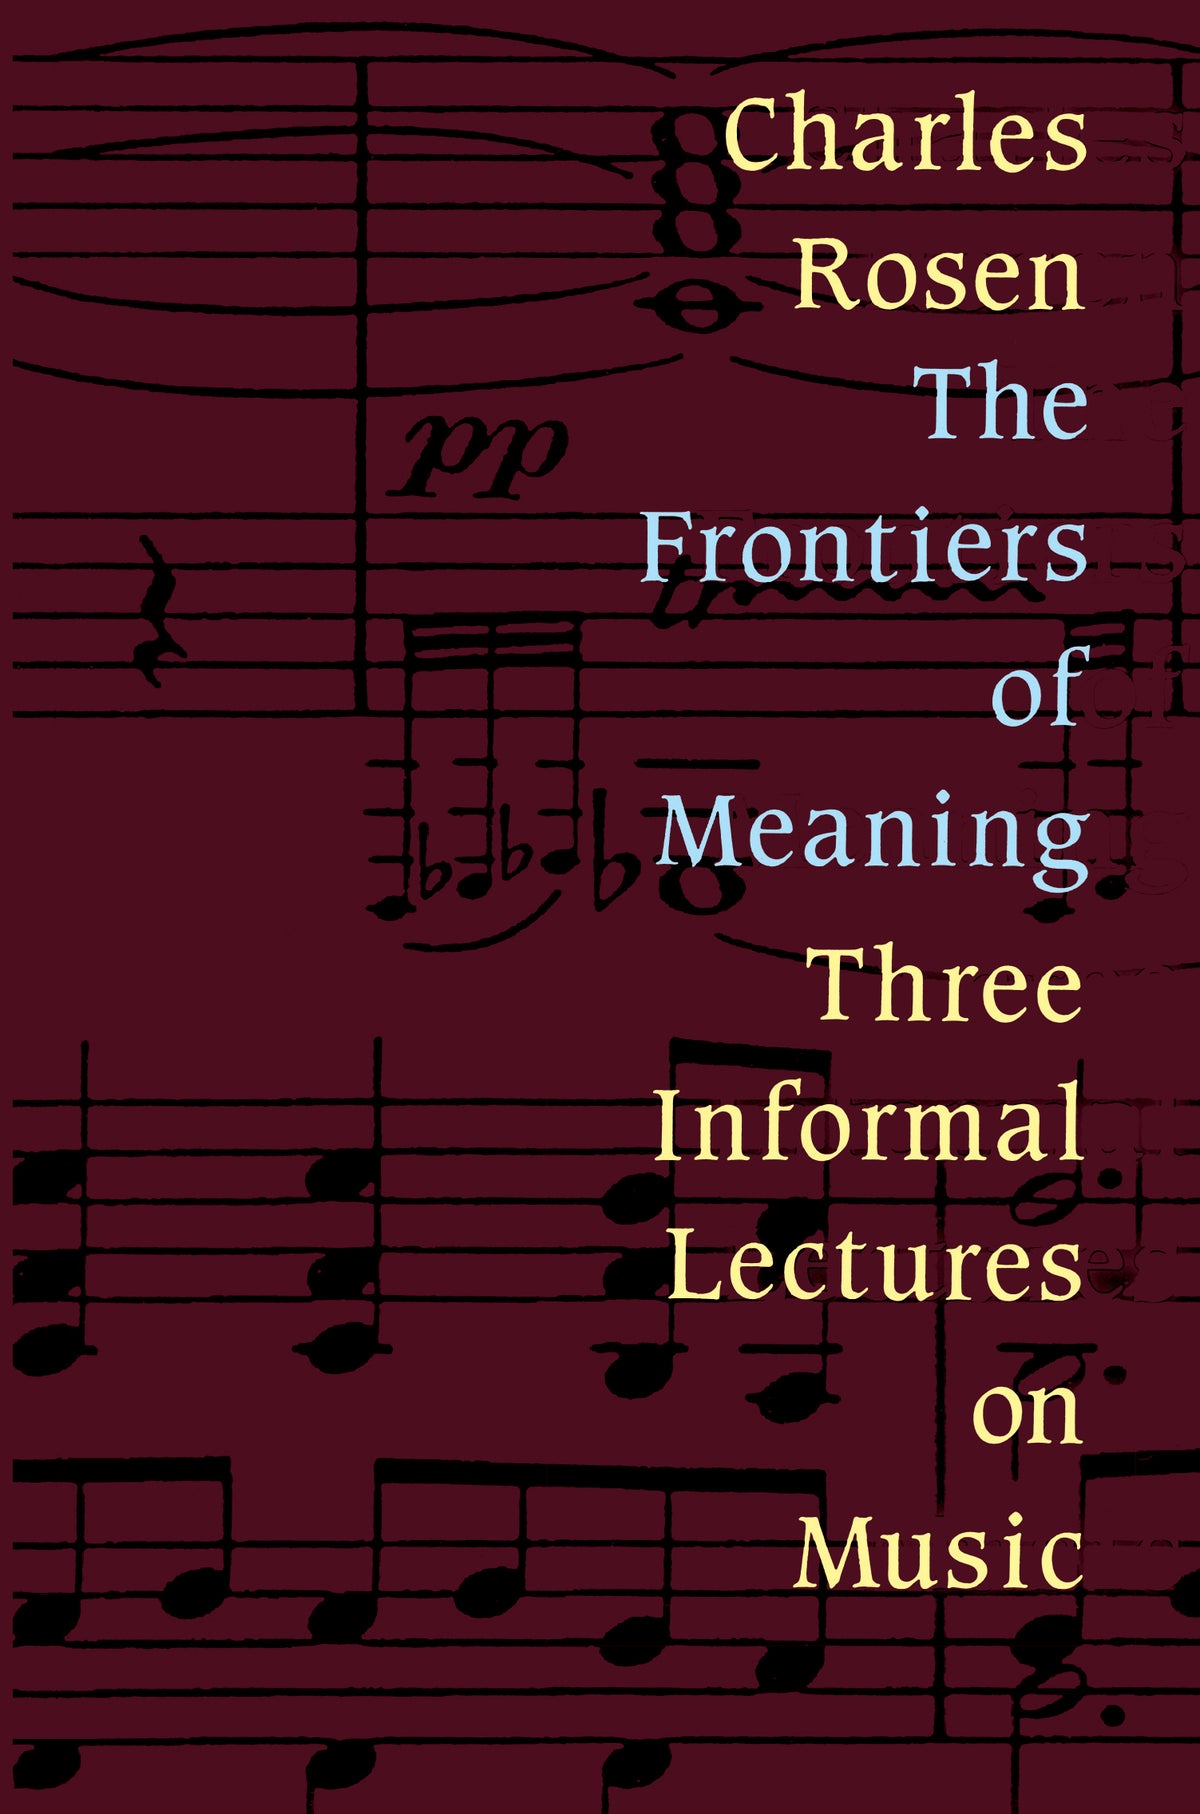 Frontiers of Meaning